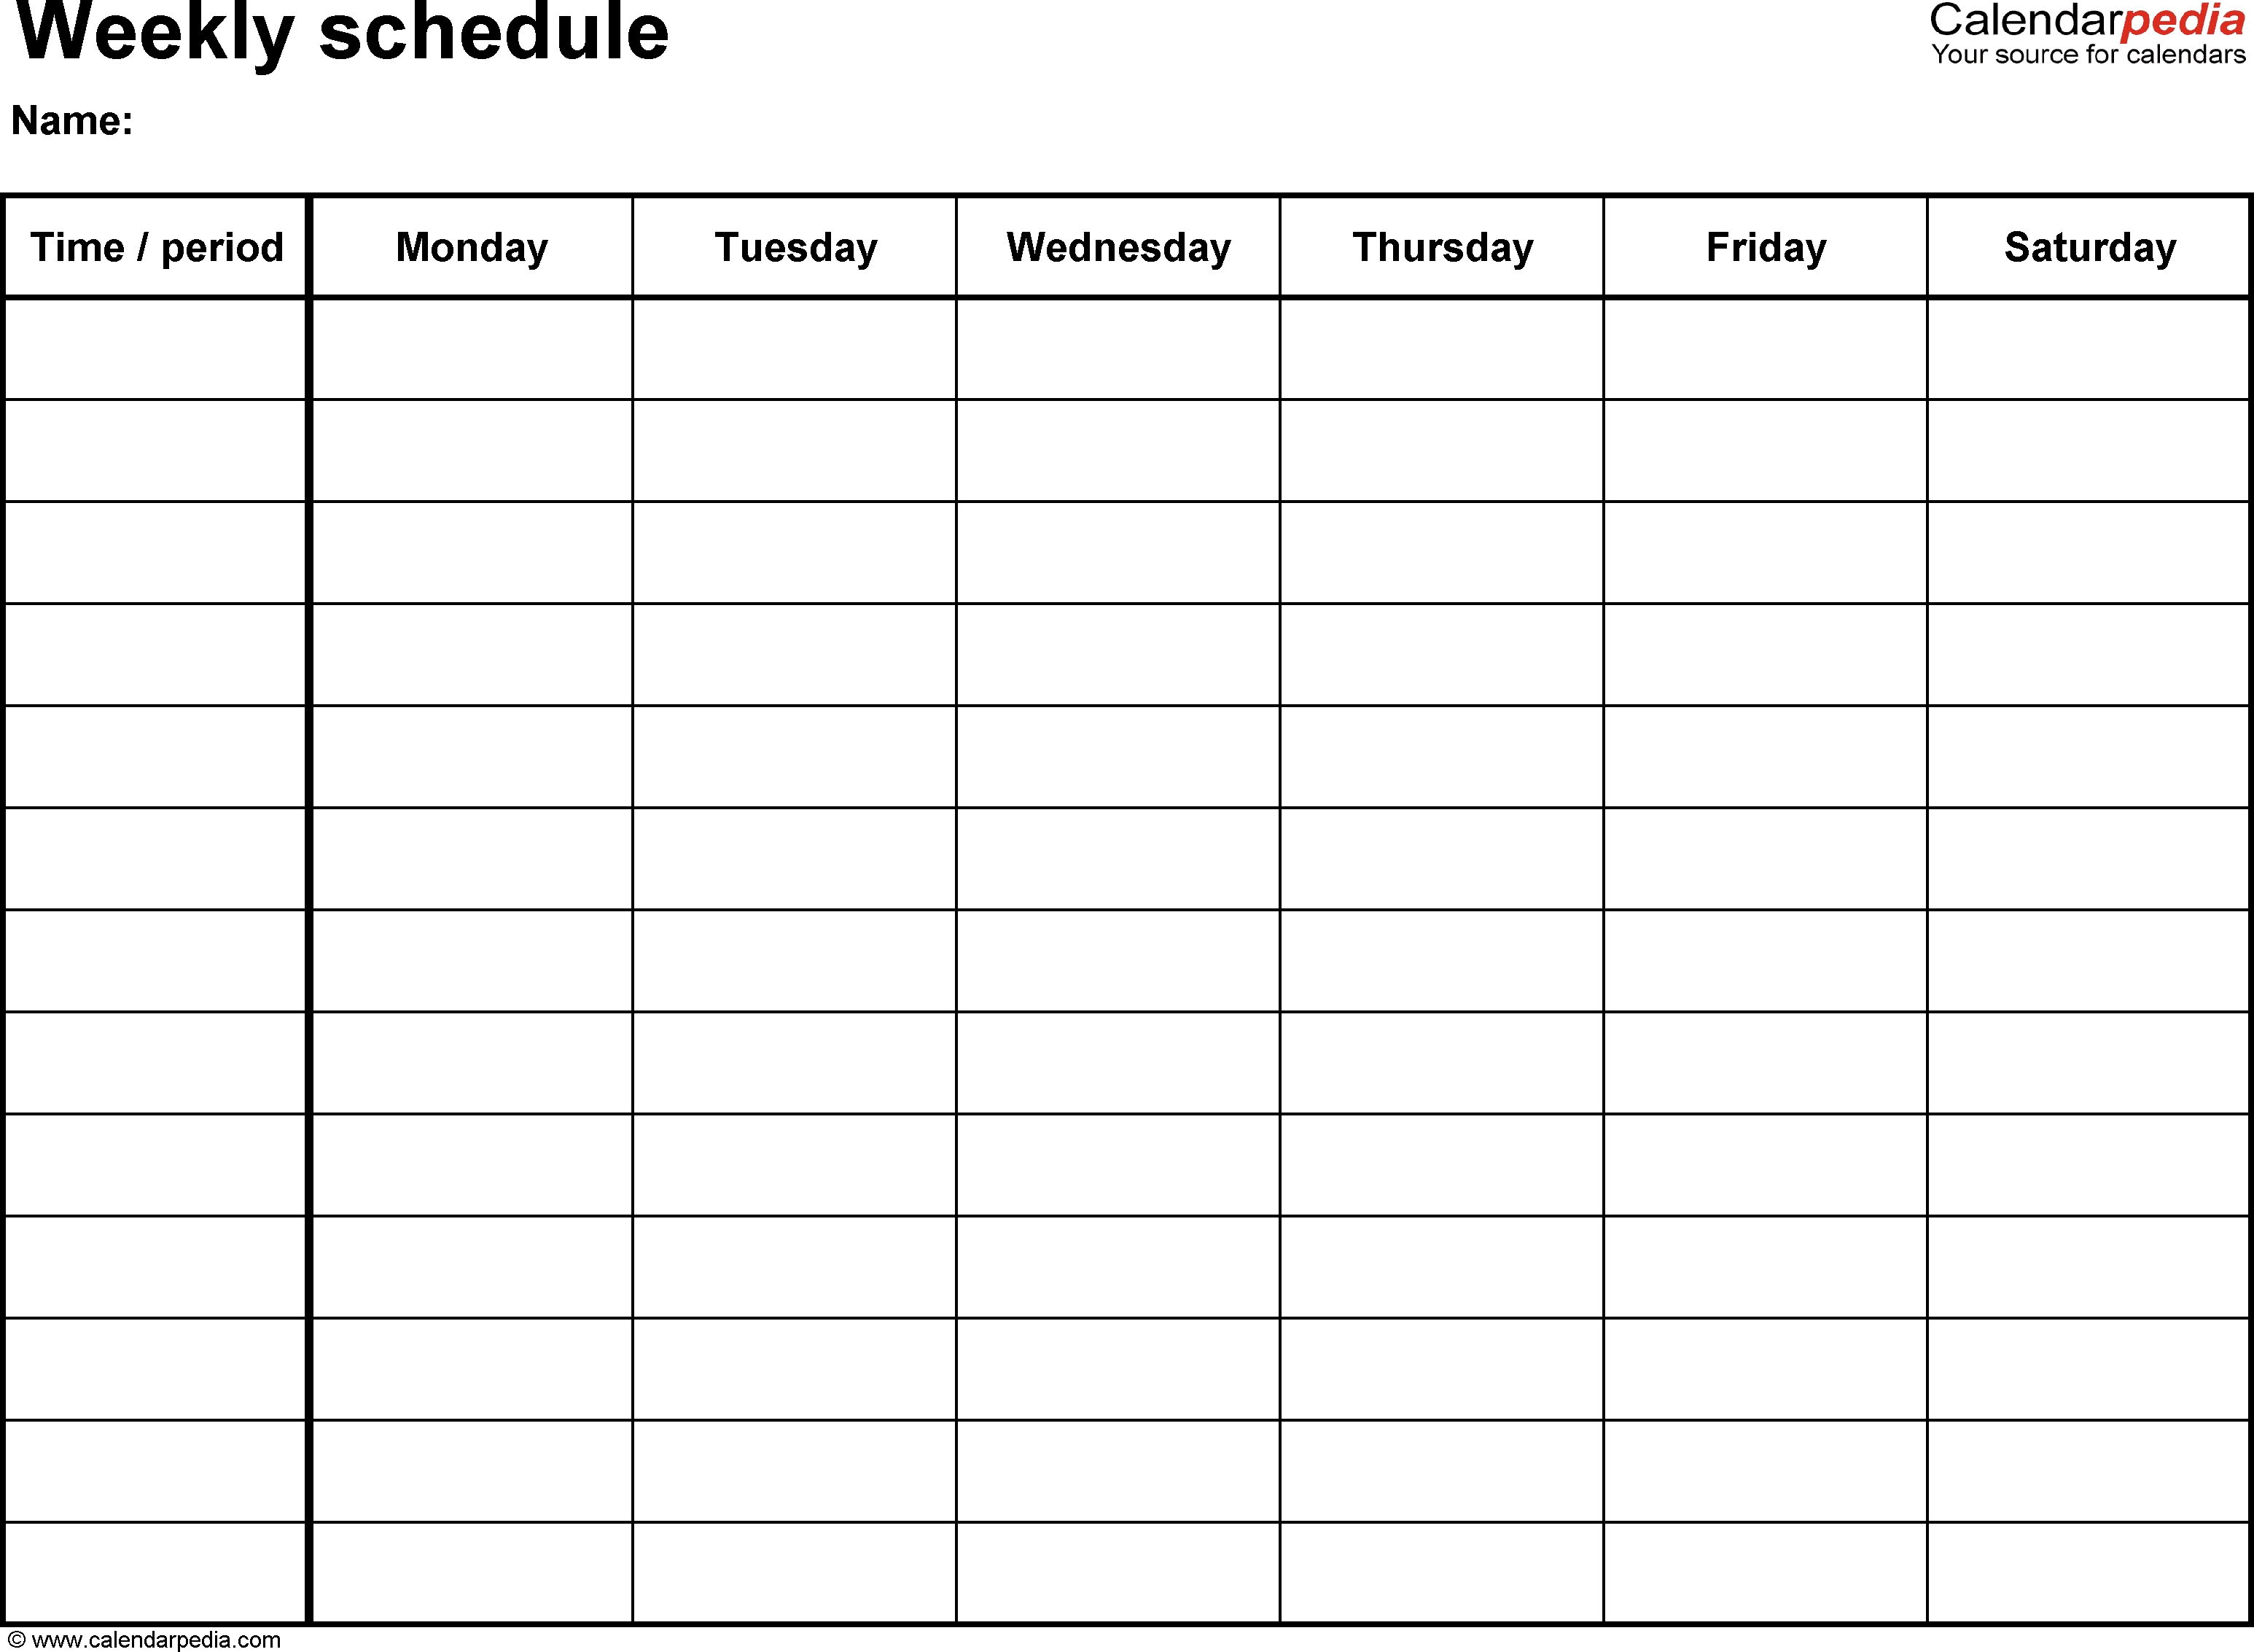 Free Weekly Schedule Templates For Excel - 18 Templates regarding Printable Weekly Schedule Flow Chart